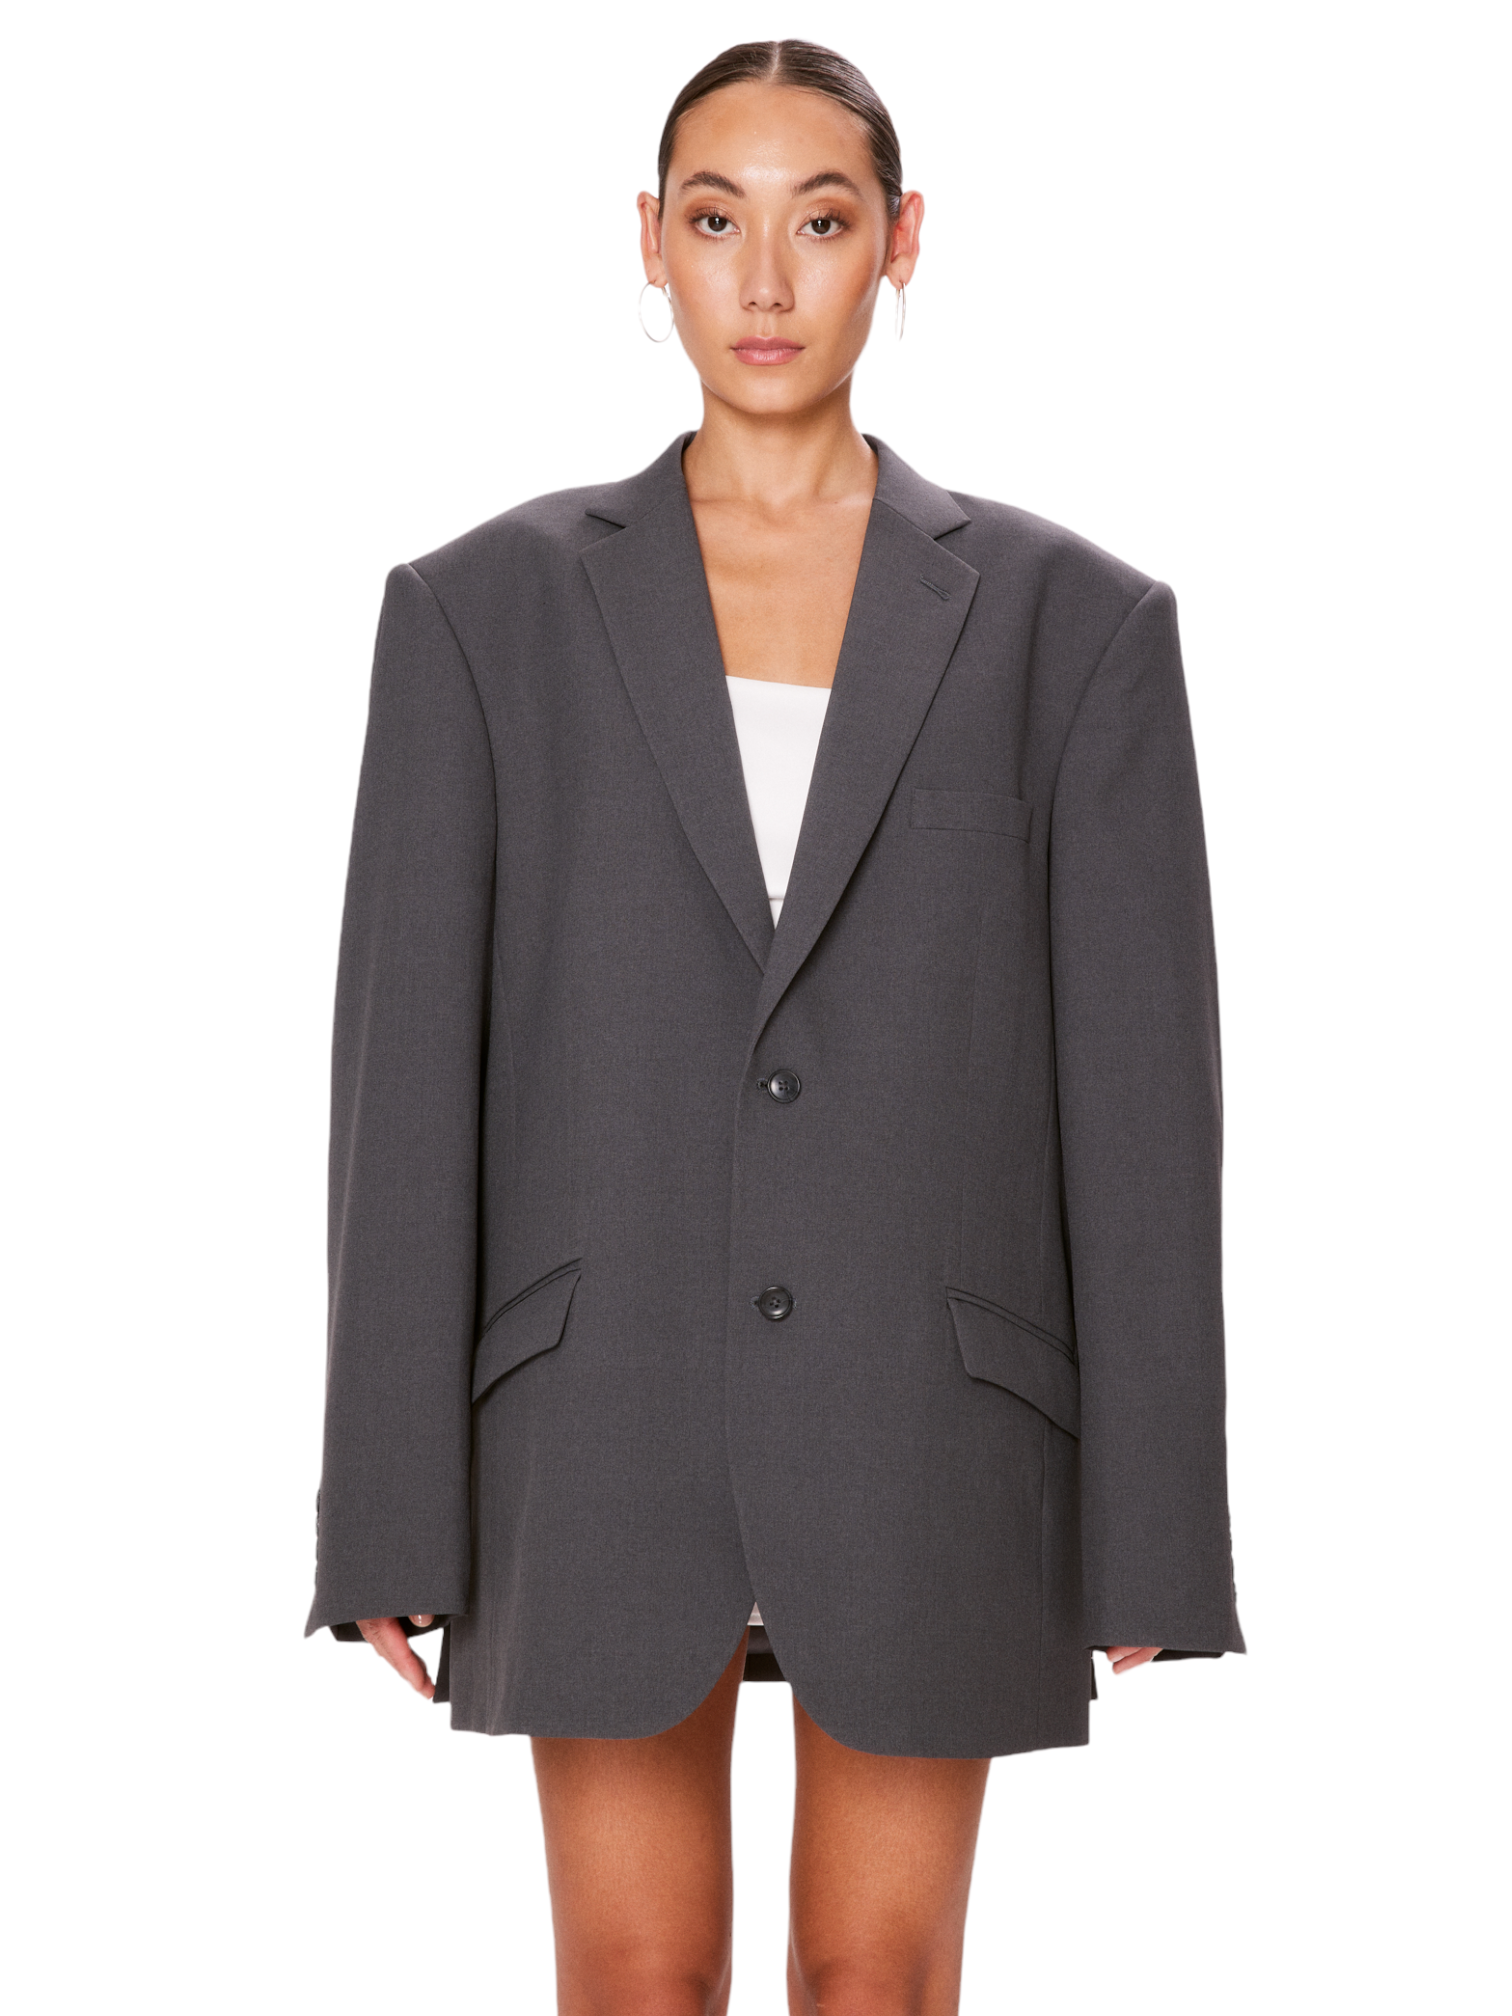 Ruby Oversized Blazer - SOLD OUT